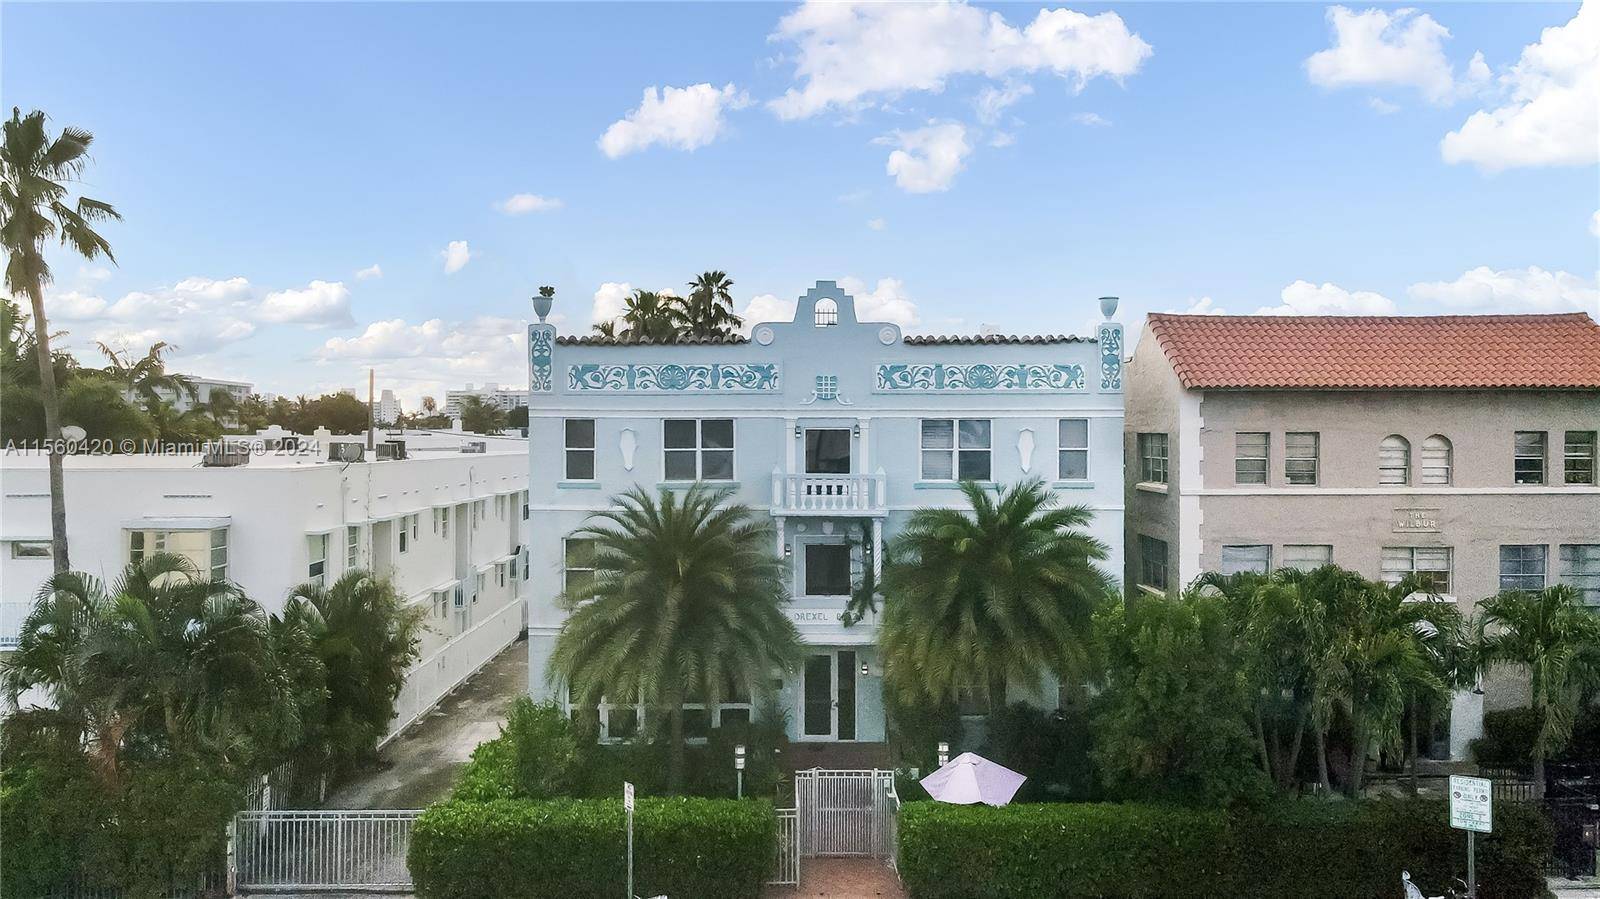 Discover the charm of Miami Beach in this cozy 2 bedroom, 2 bathroom walk up apartment nestled within the historic 1218 Drexel Ave.